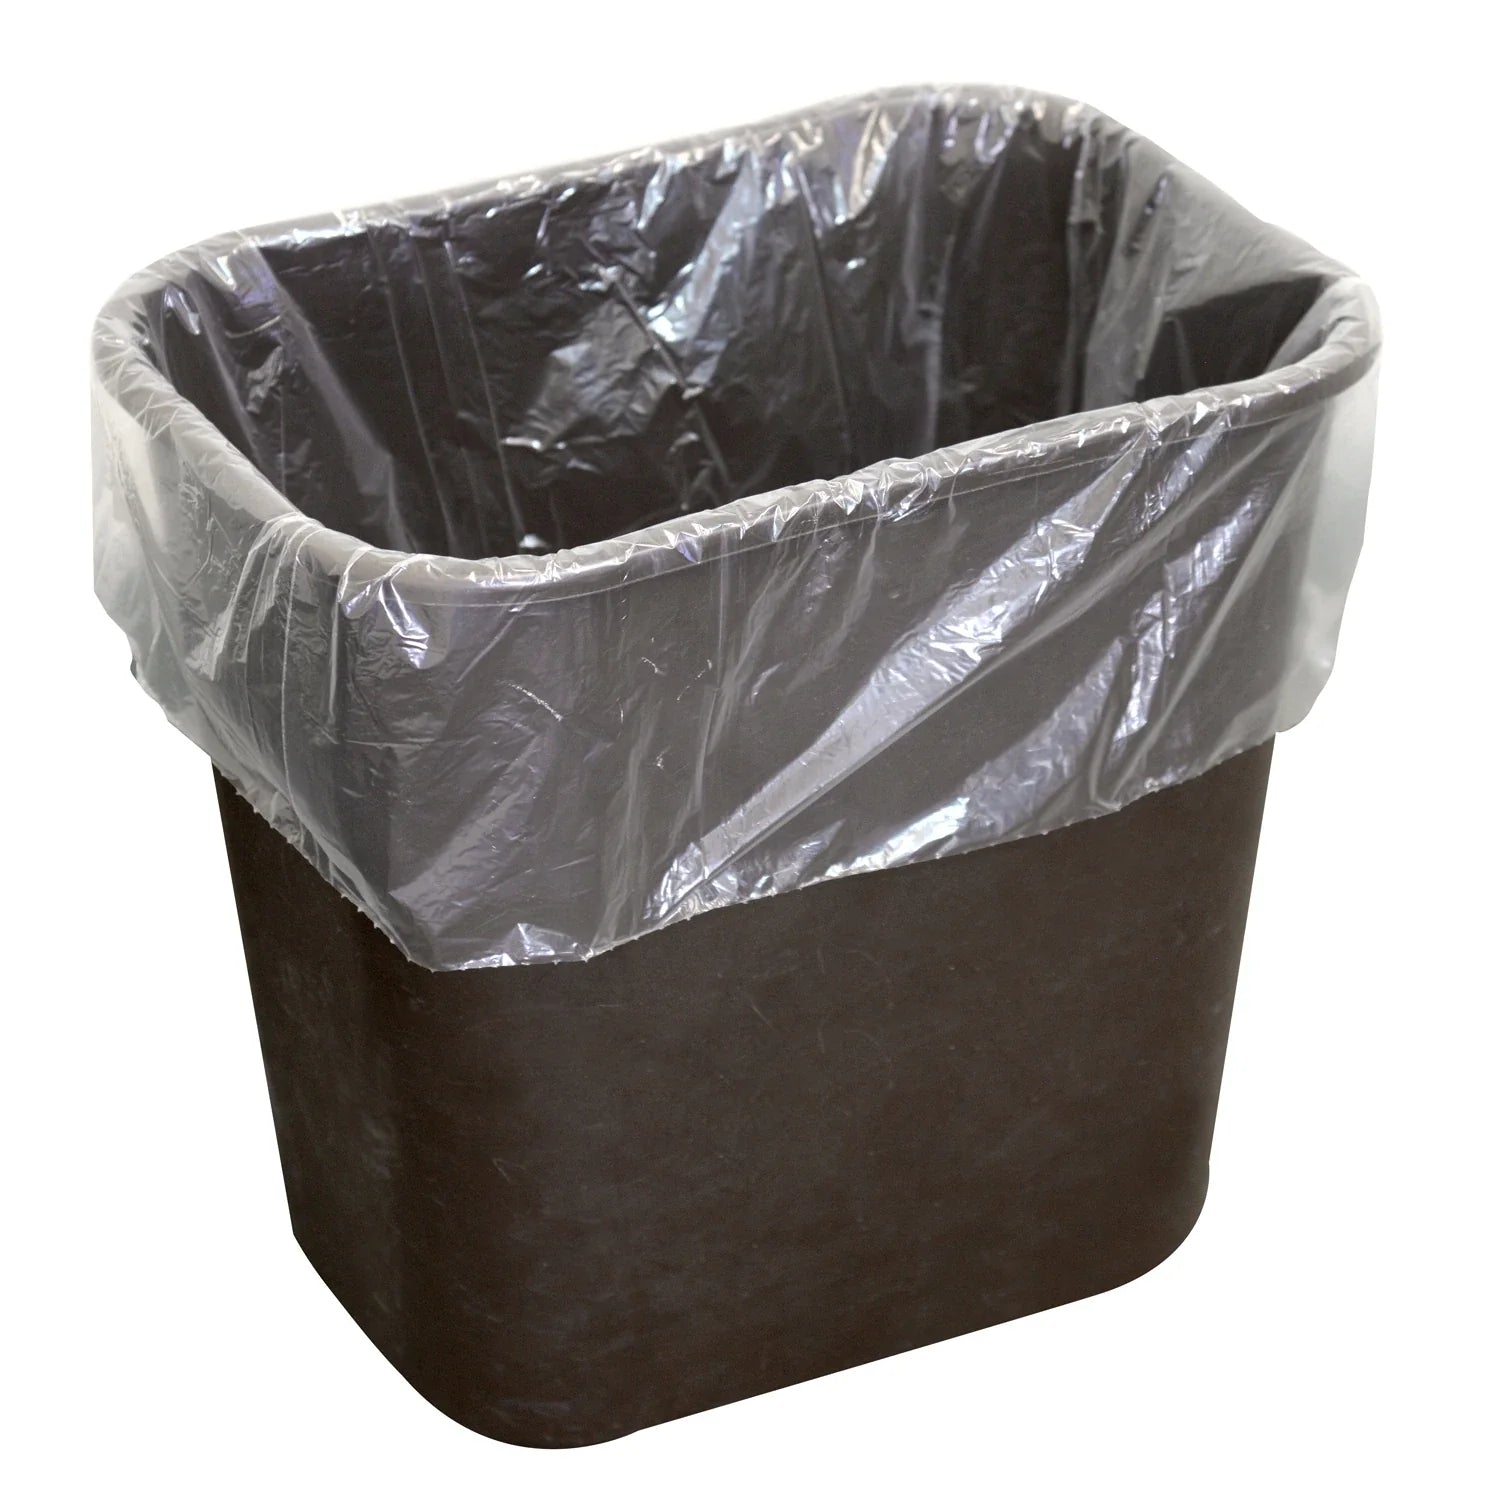 Plastic Trash Bags and Can Liners